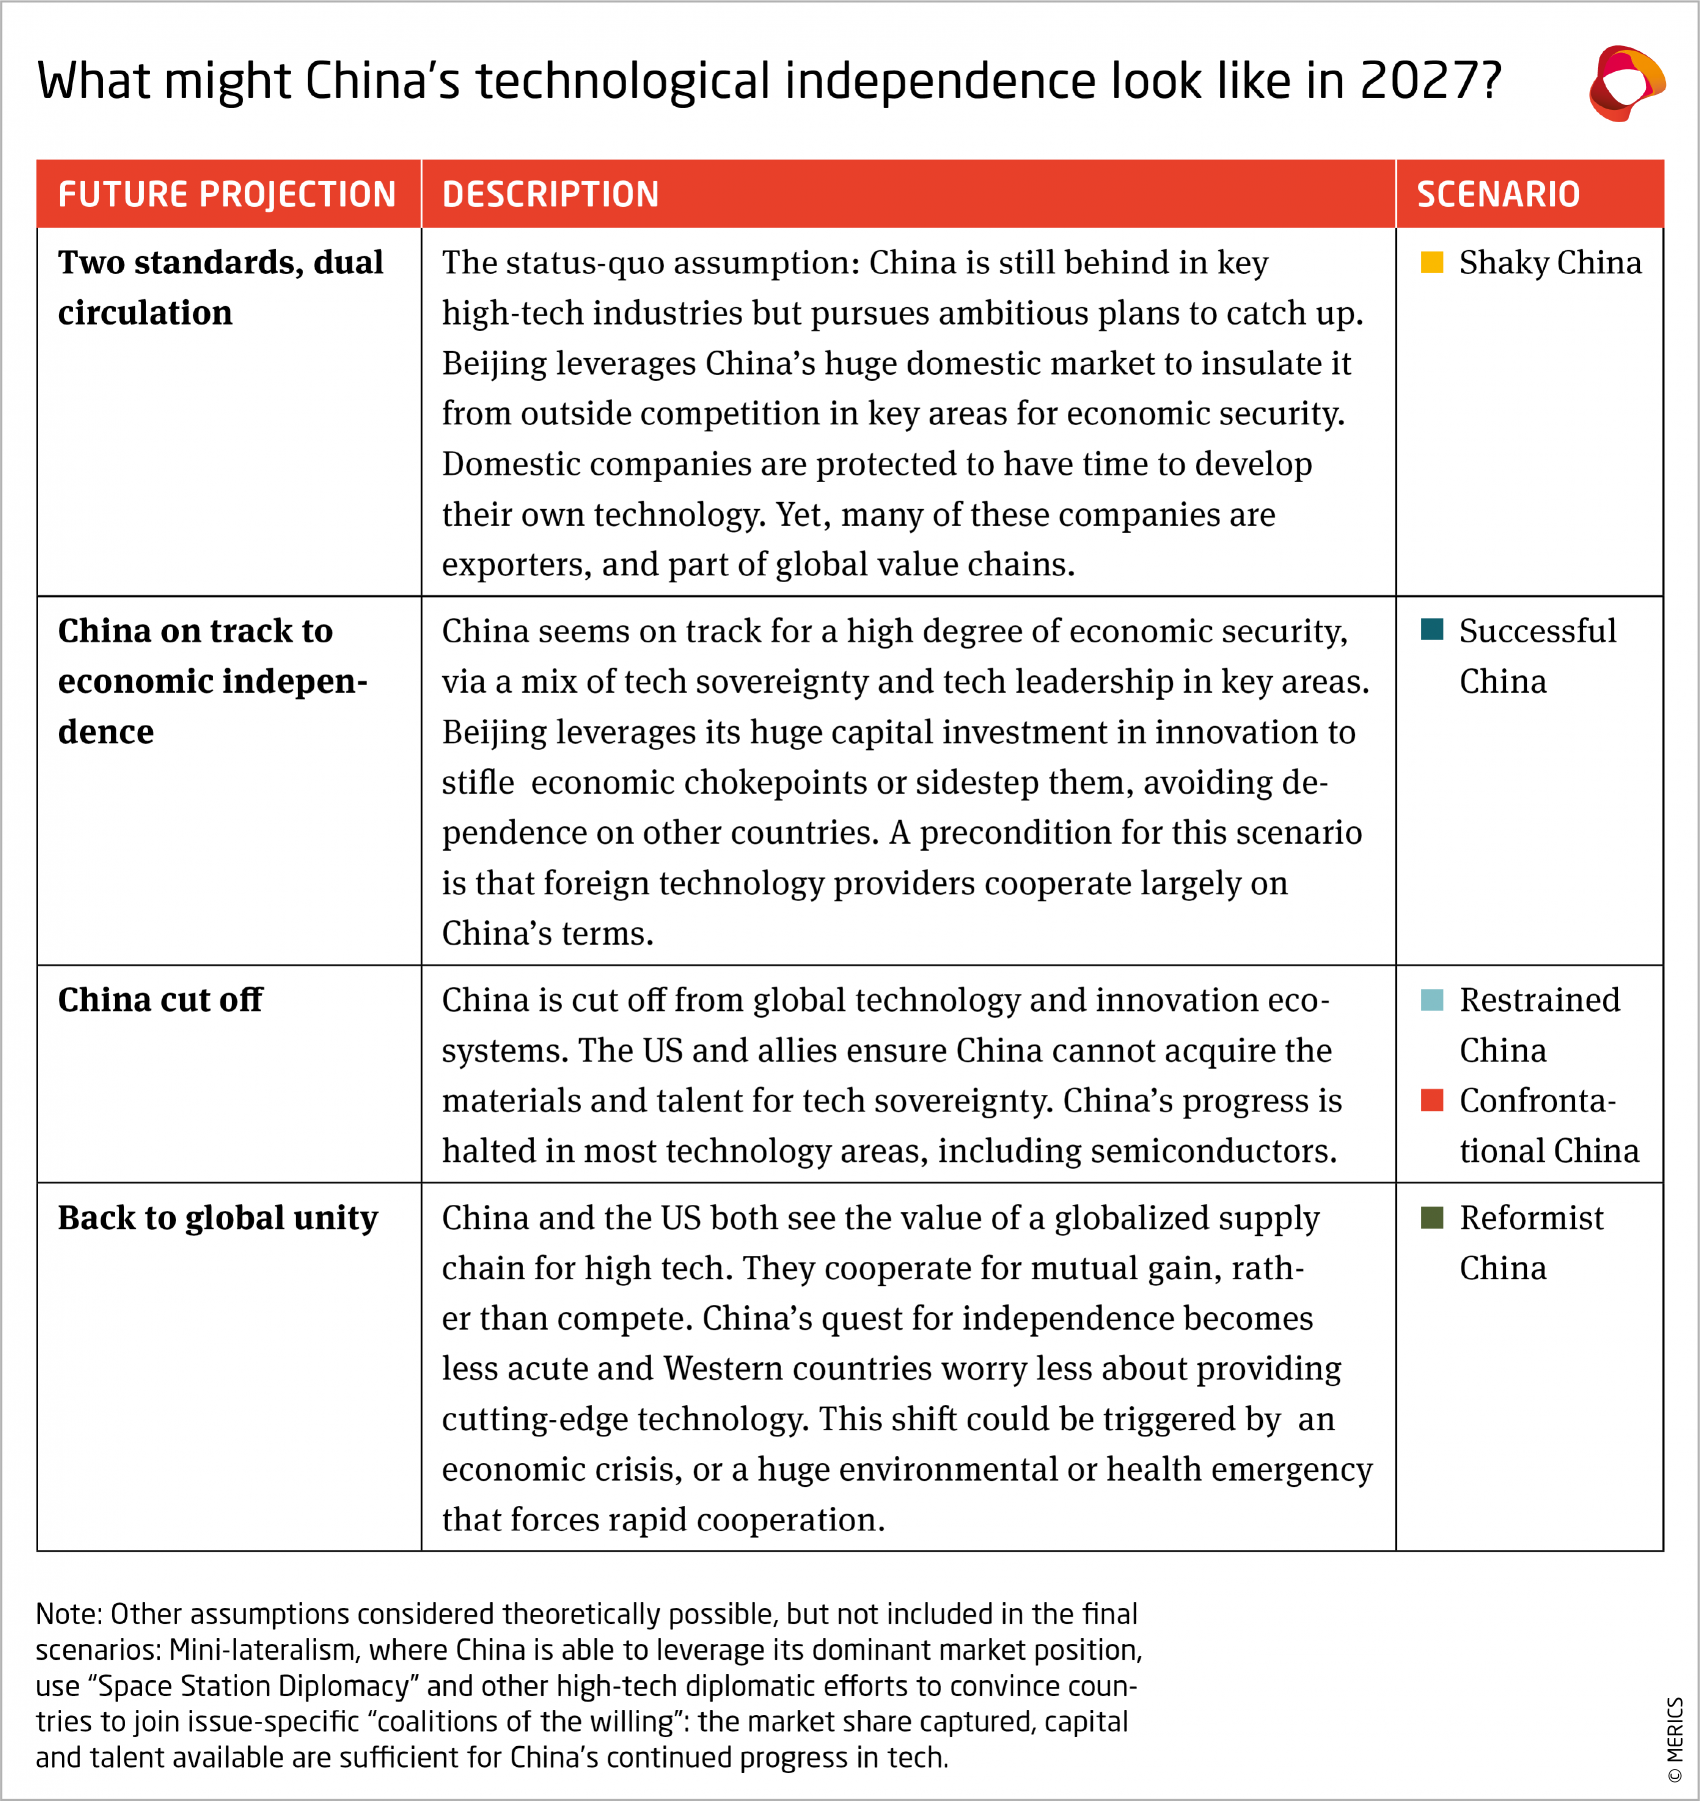 China’s technological independence in 2027